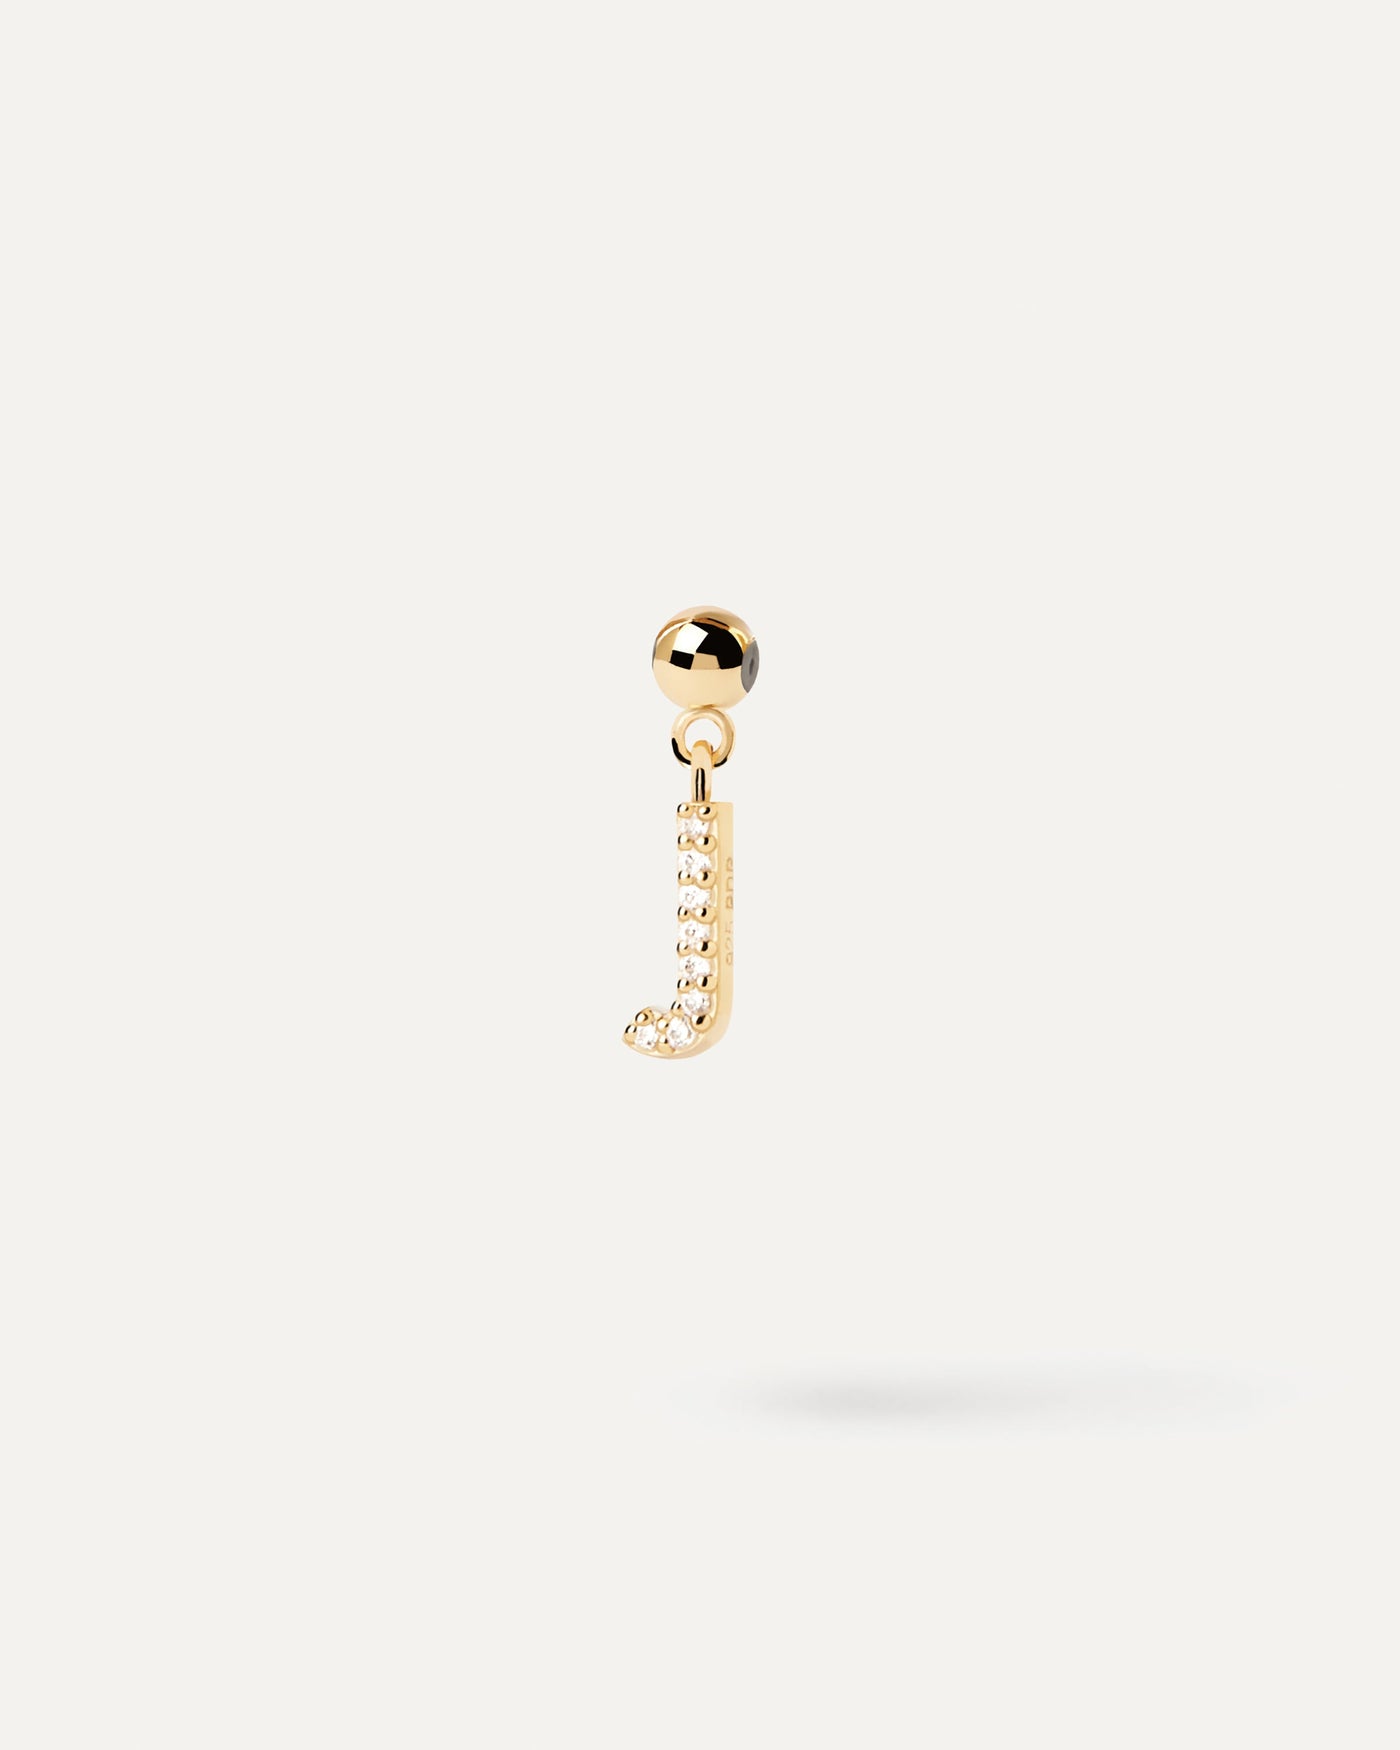 2023 Selection | Letter J Charm. Get the latest arrival from PDPAOLA. Place your order safely and get this Best Seller. Free Shipping.